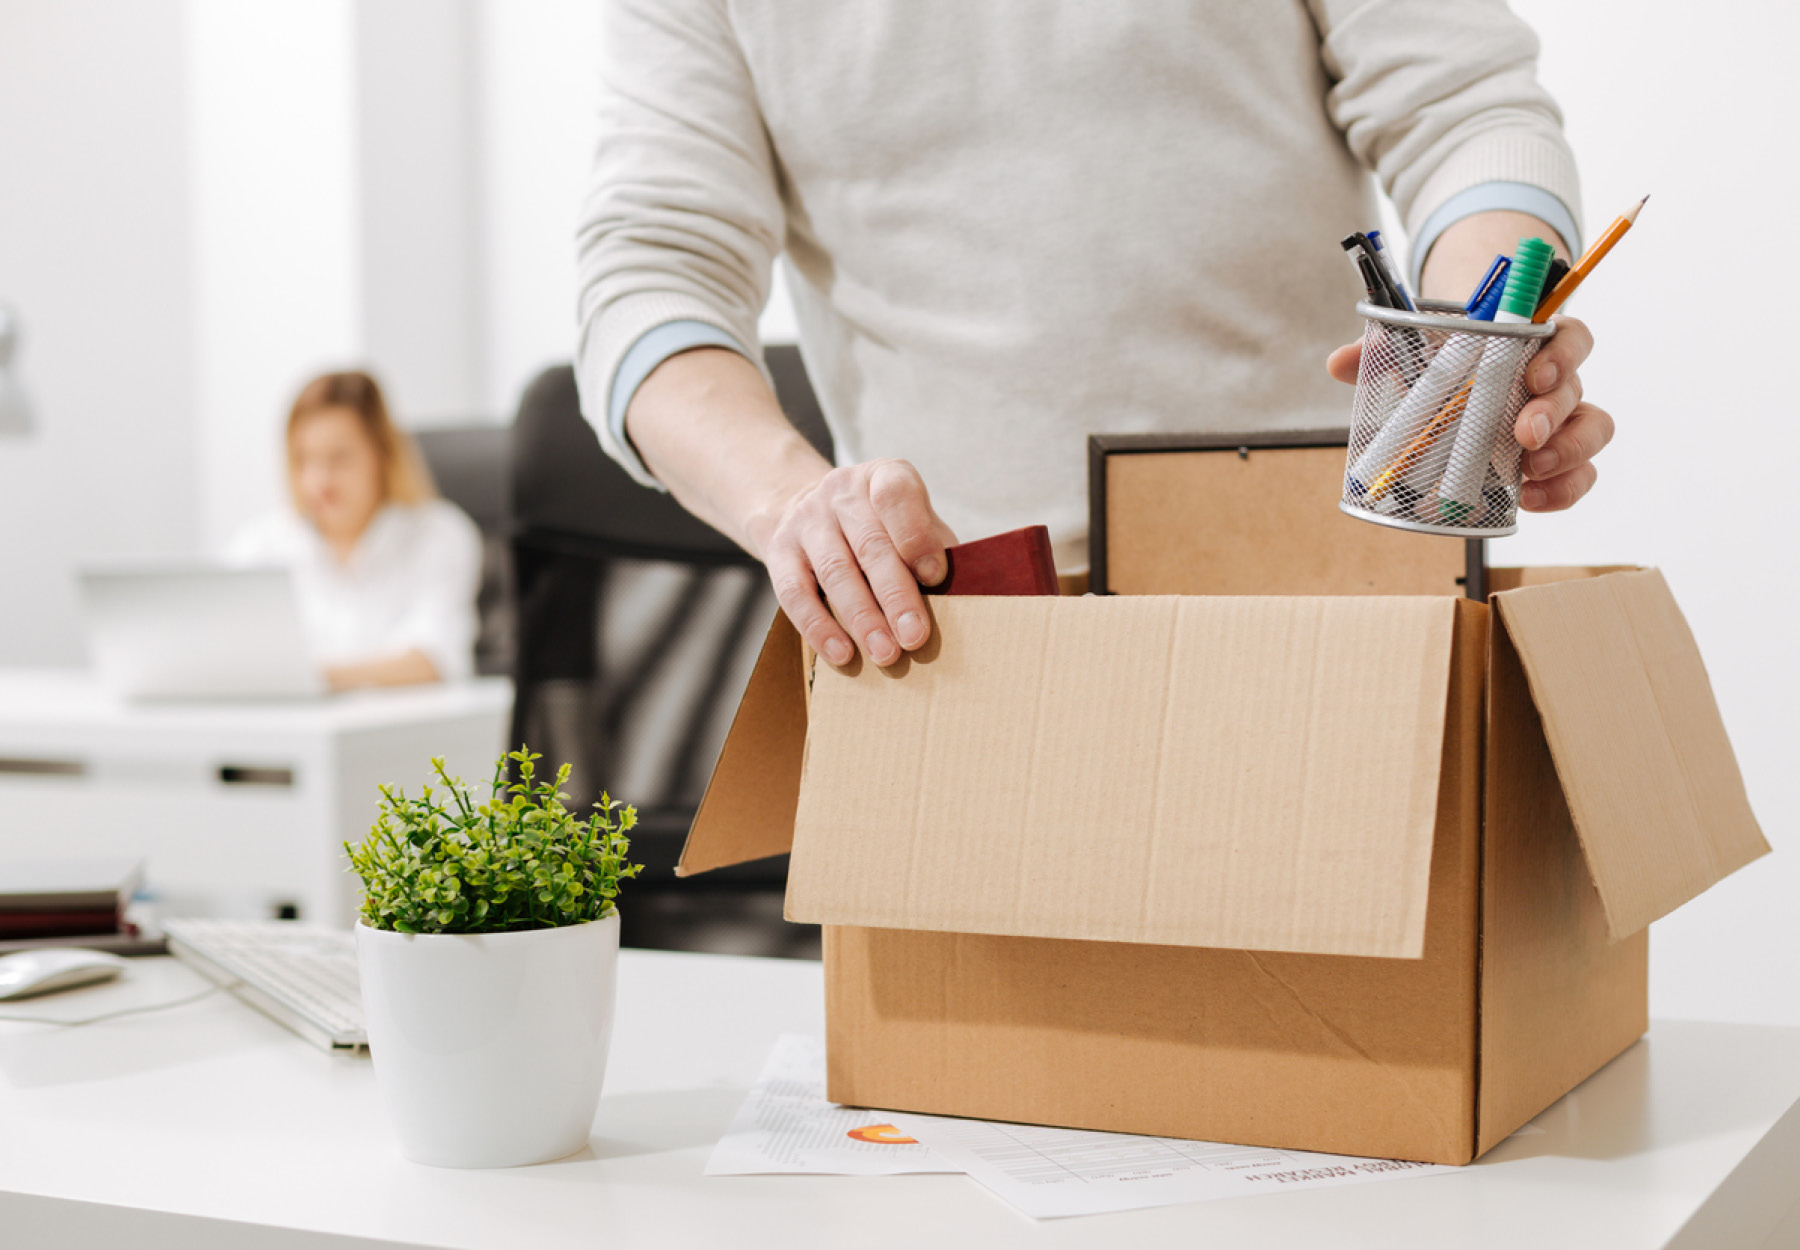 Office worker packing a box and leaving the office iStock Image